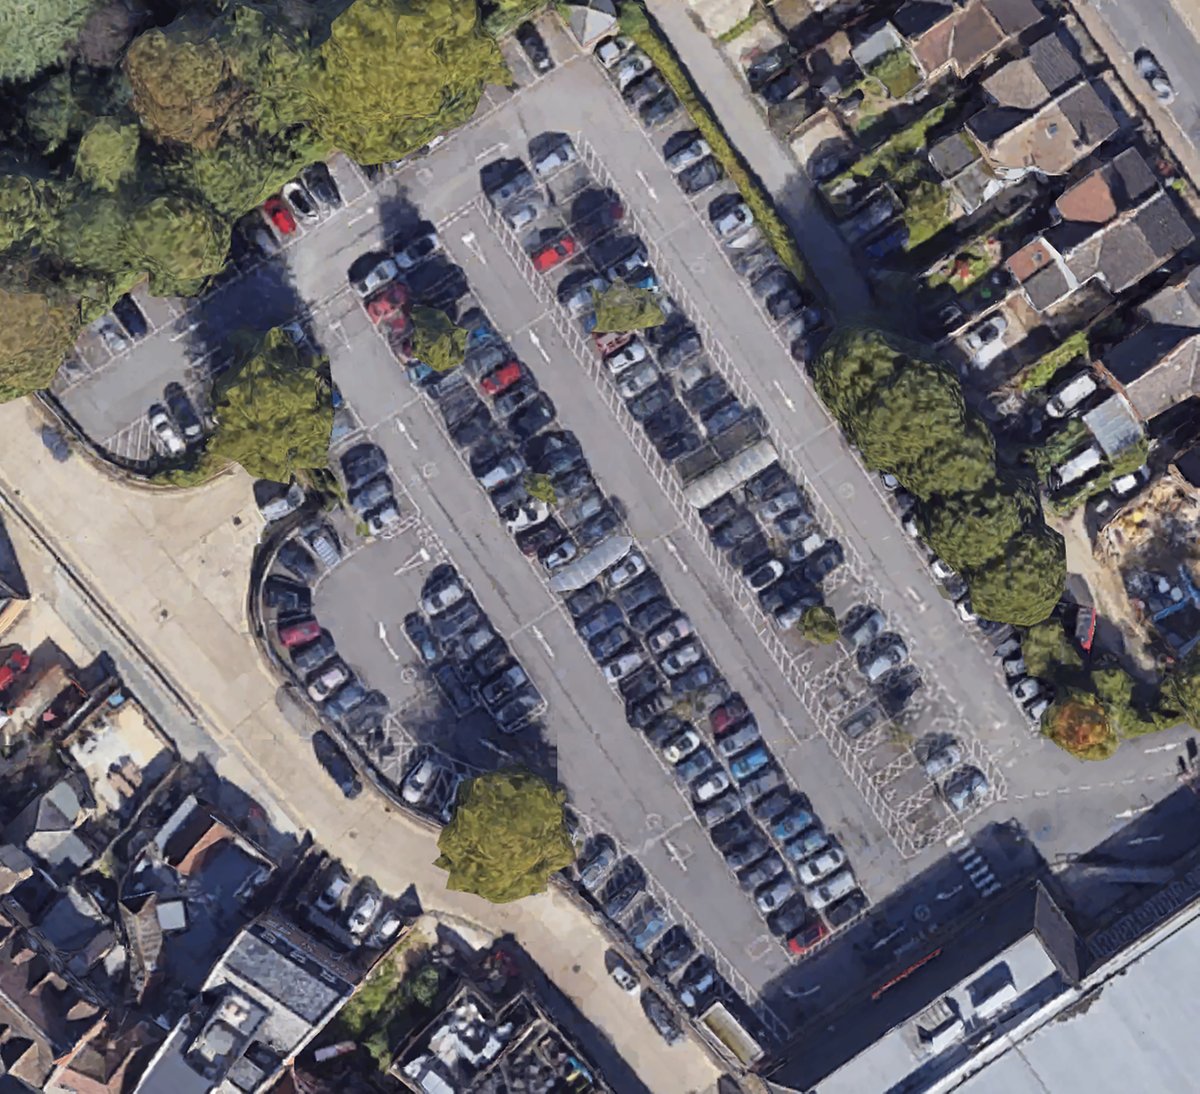 I live in Bromley and almost always shop at the same Sainsbury’s in the centre of town, here’s a satellite view of their car park. It’s a great car park because you can always get a space and it is laid out really well. Comfortably in my top 5 Bromley car parks.